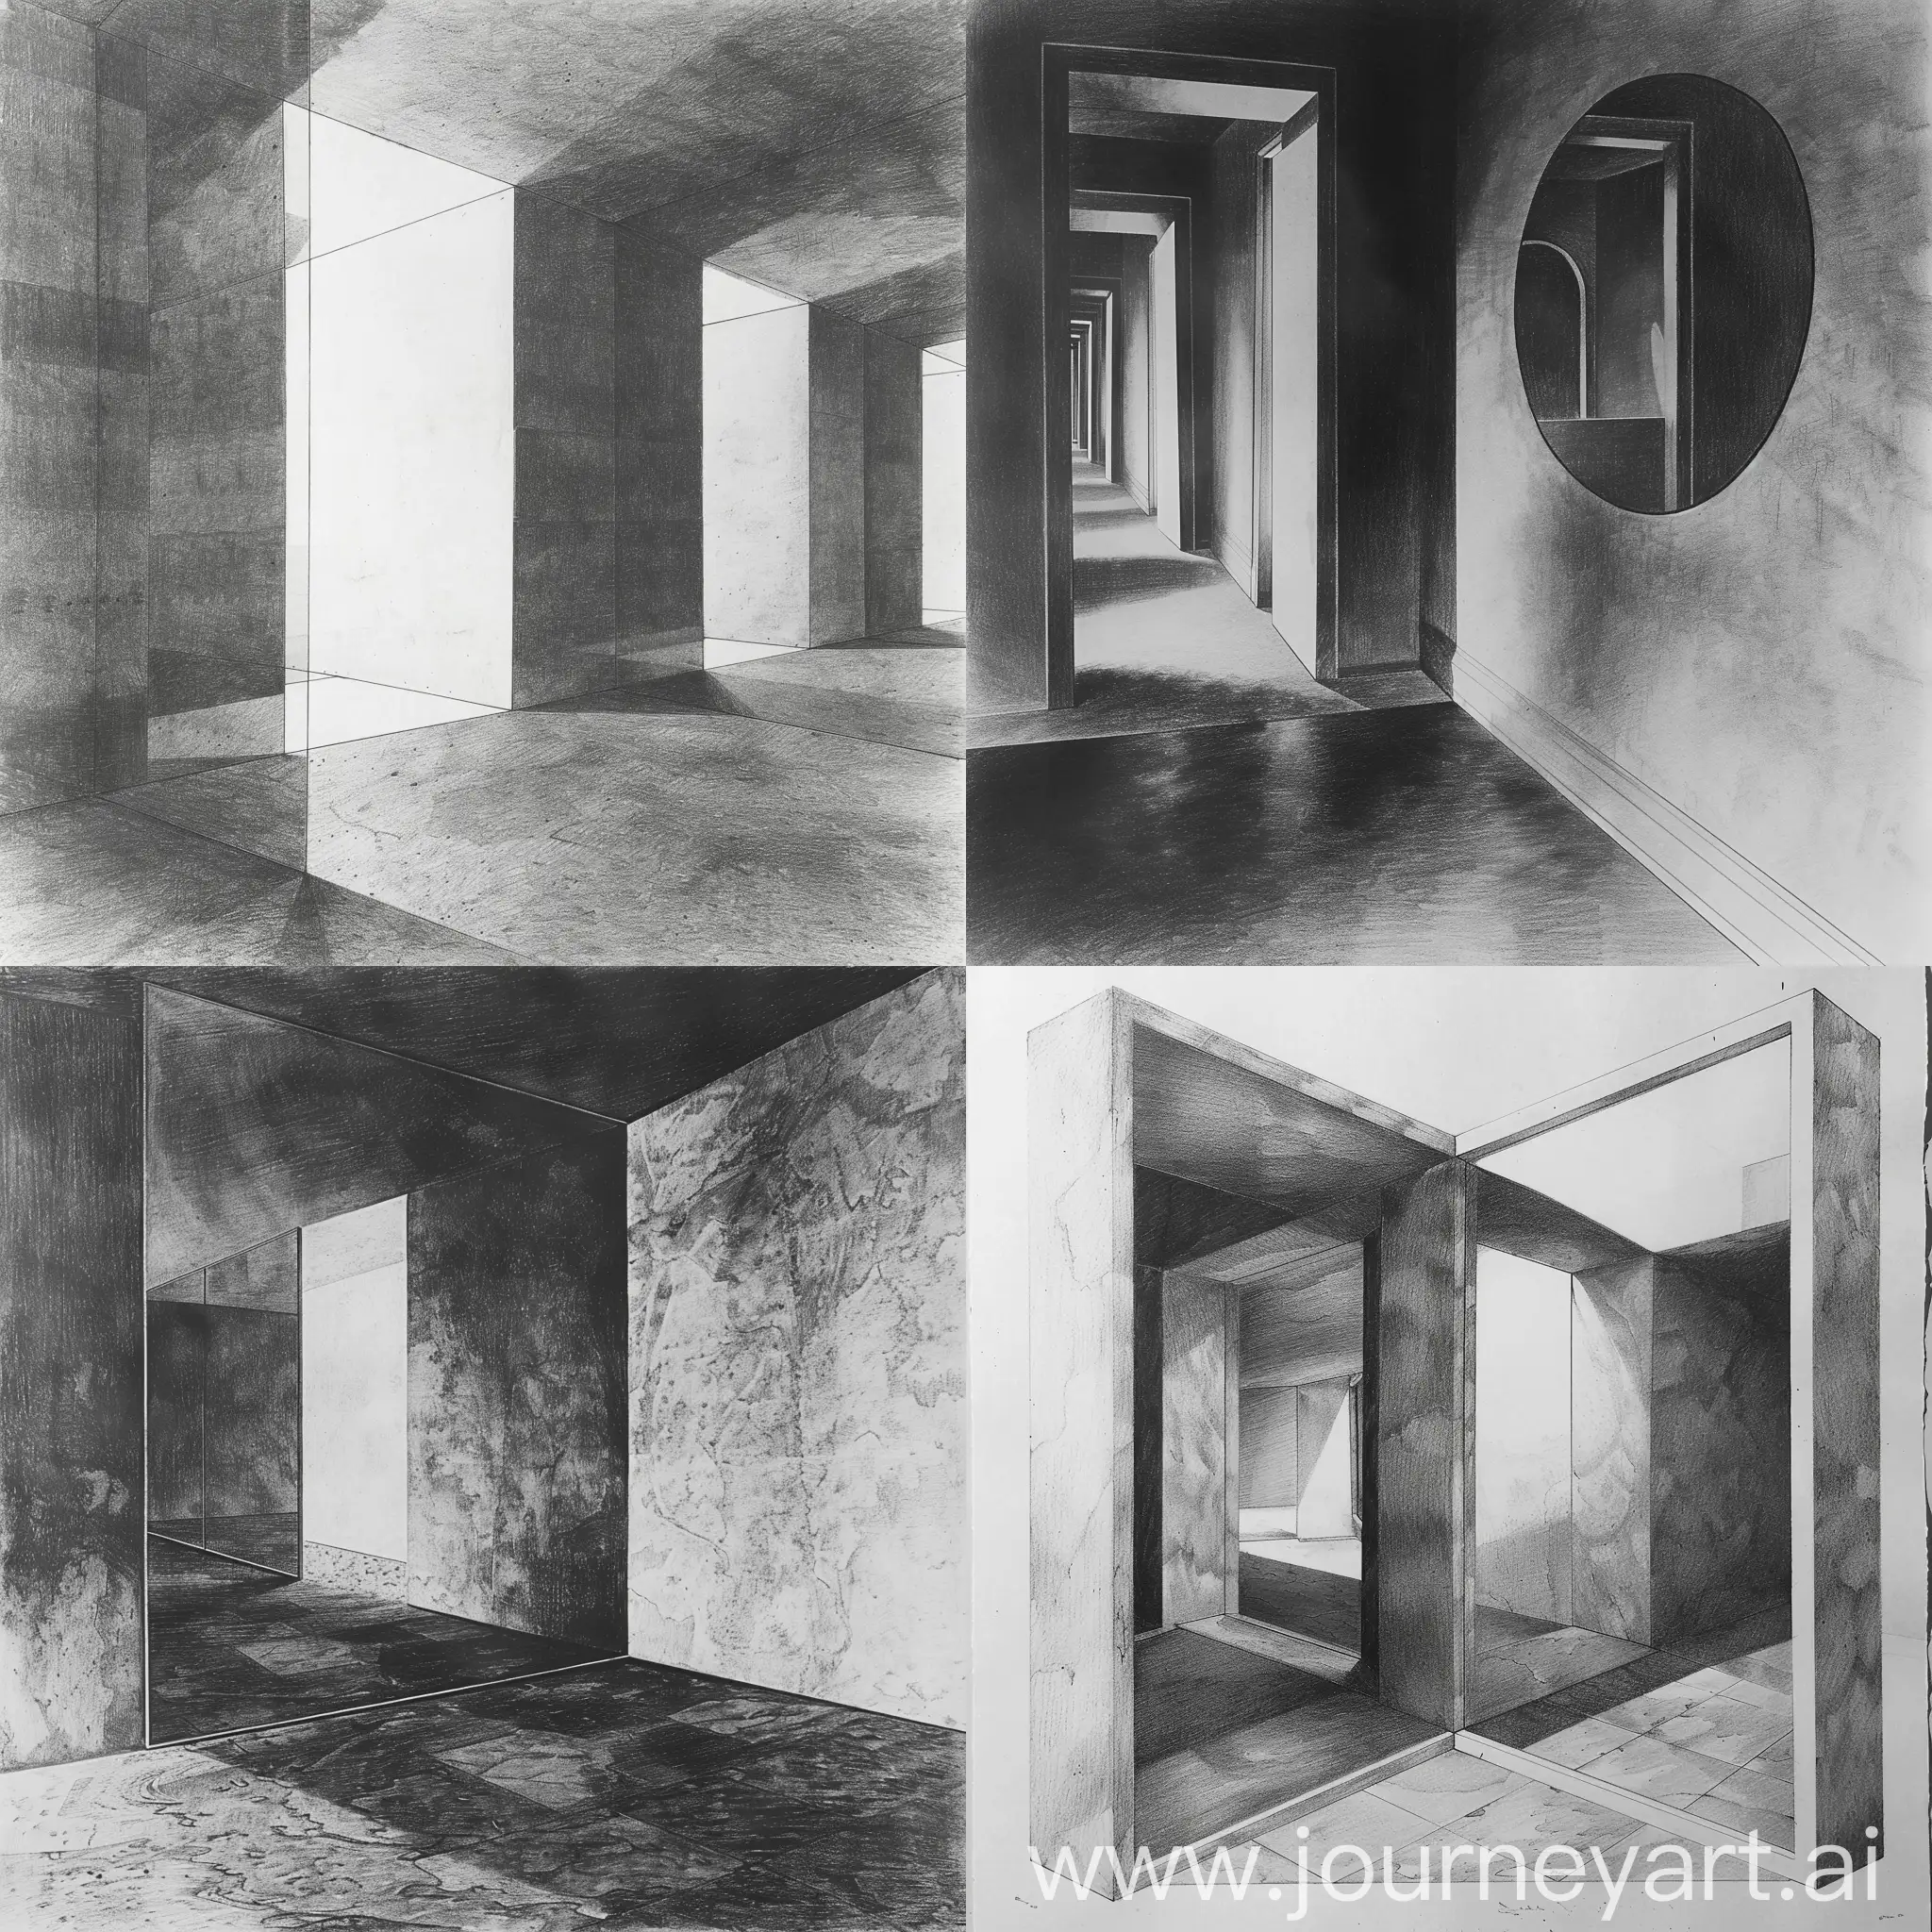 pencil drawing, black and white, museum, mirror, windowless and doorless room